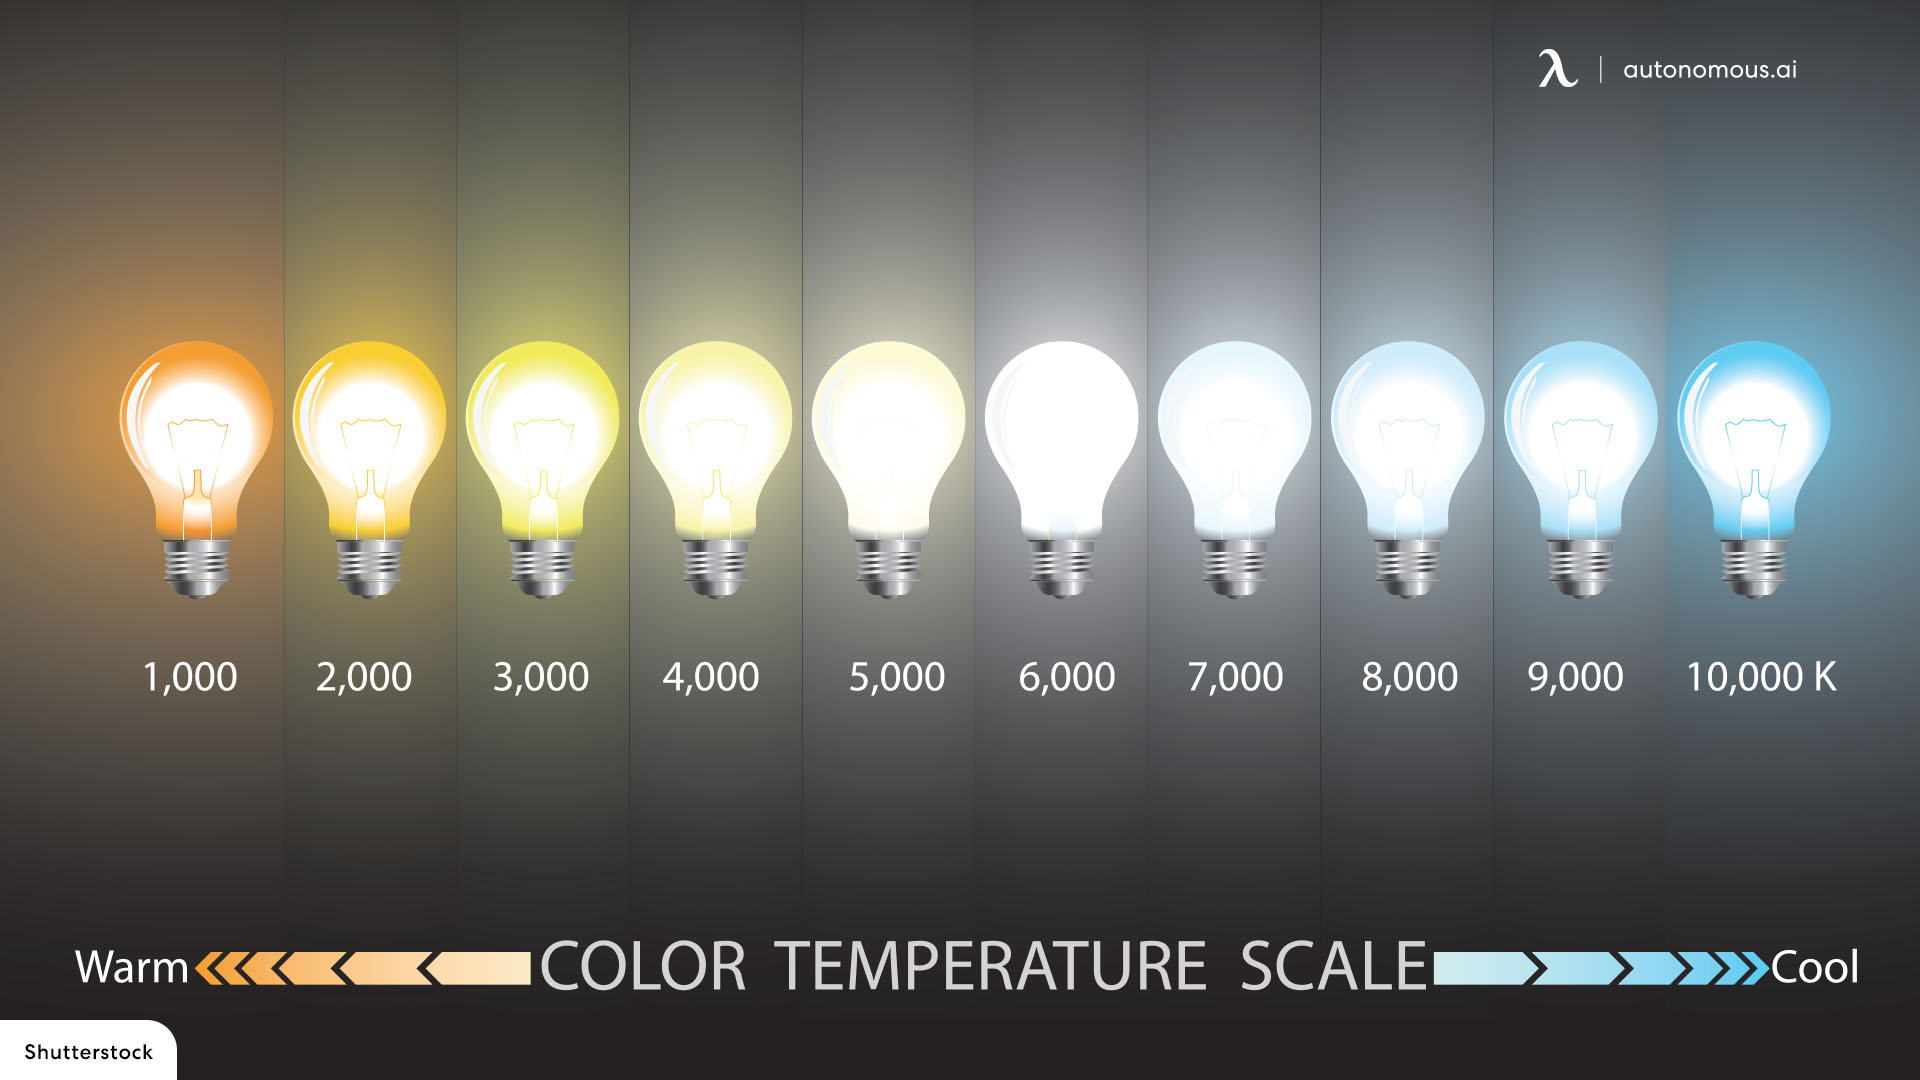 What is The Color Temperature of Light